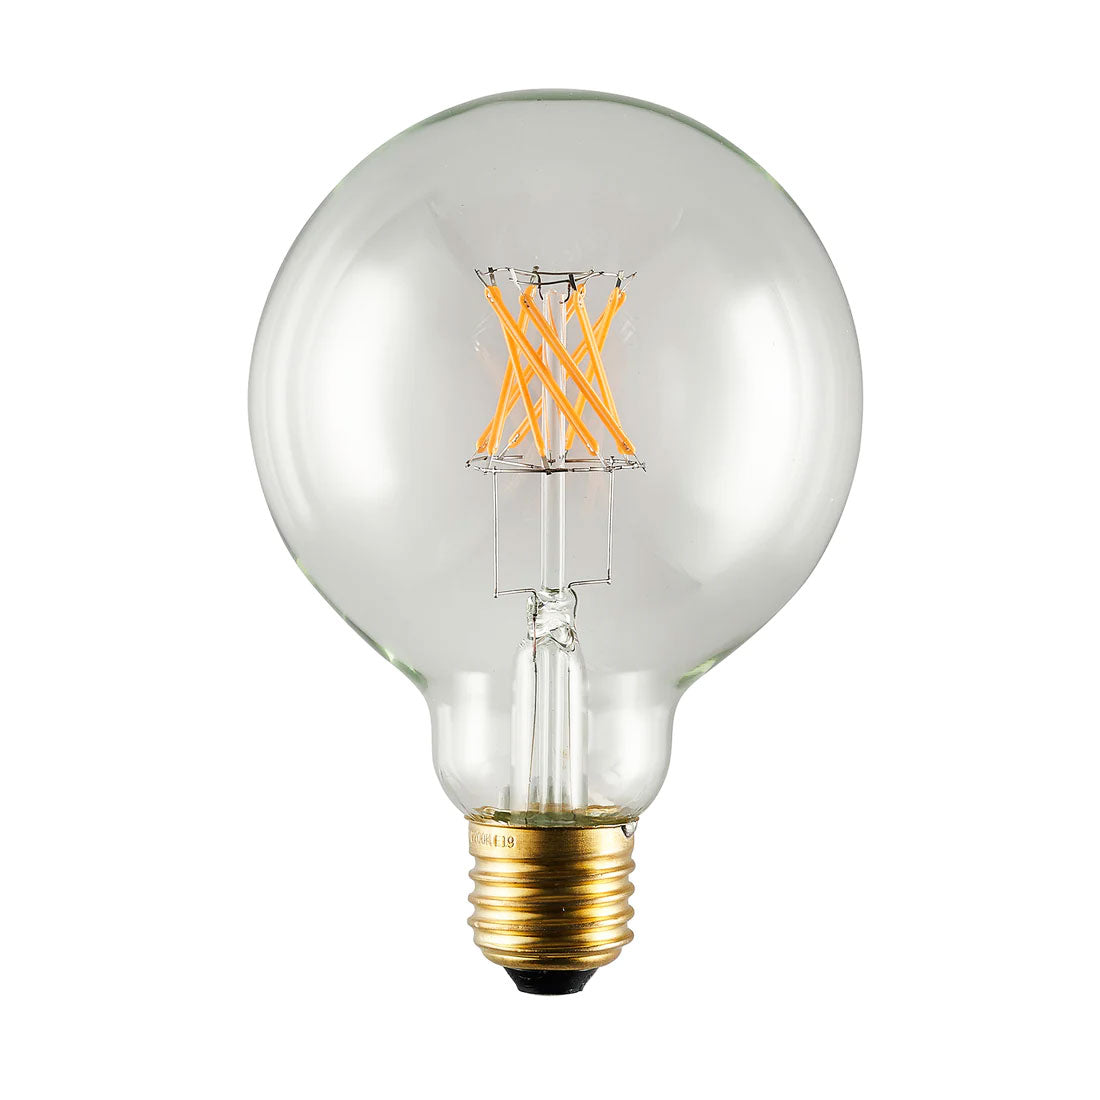 South Charlotte Fine Lightings sell this Well Lit classic LED lightbulb Estella G95, which offers outstanding performance similar to traditional incandescent lightbulbs